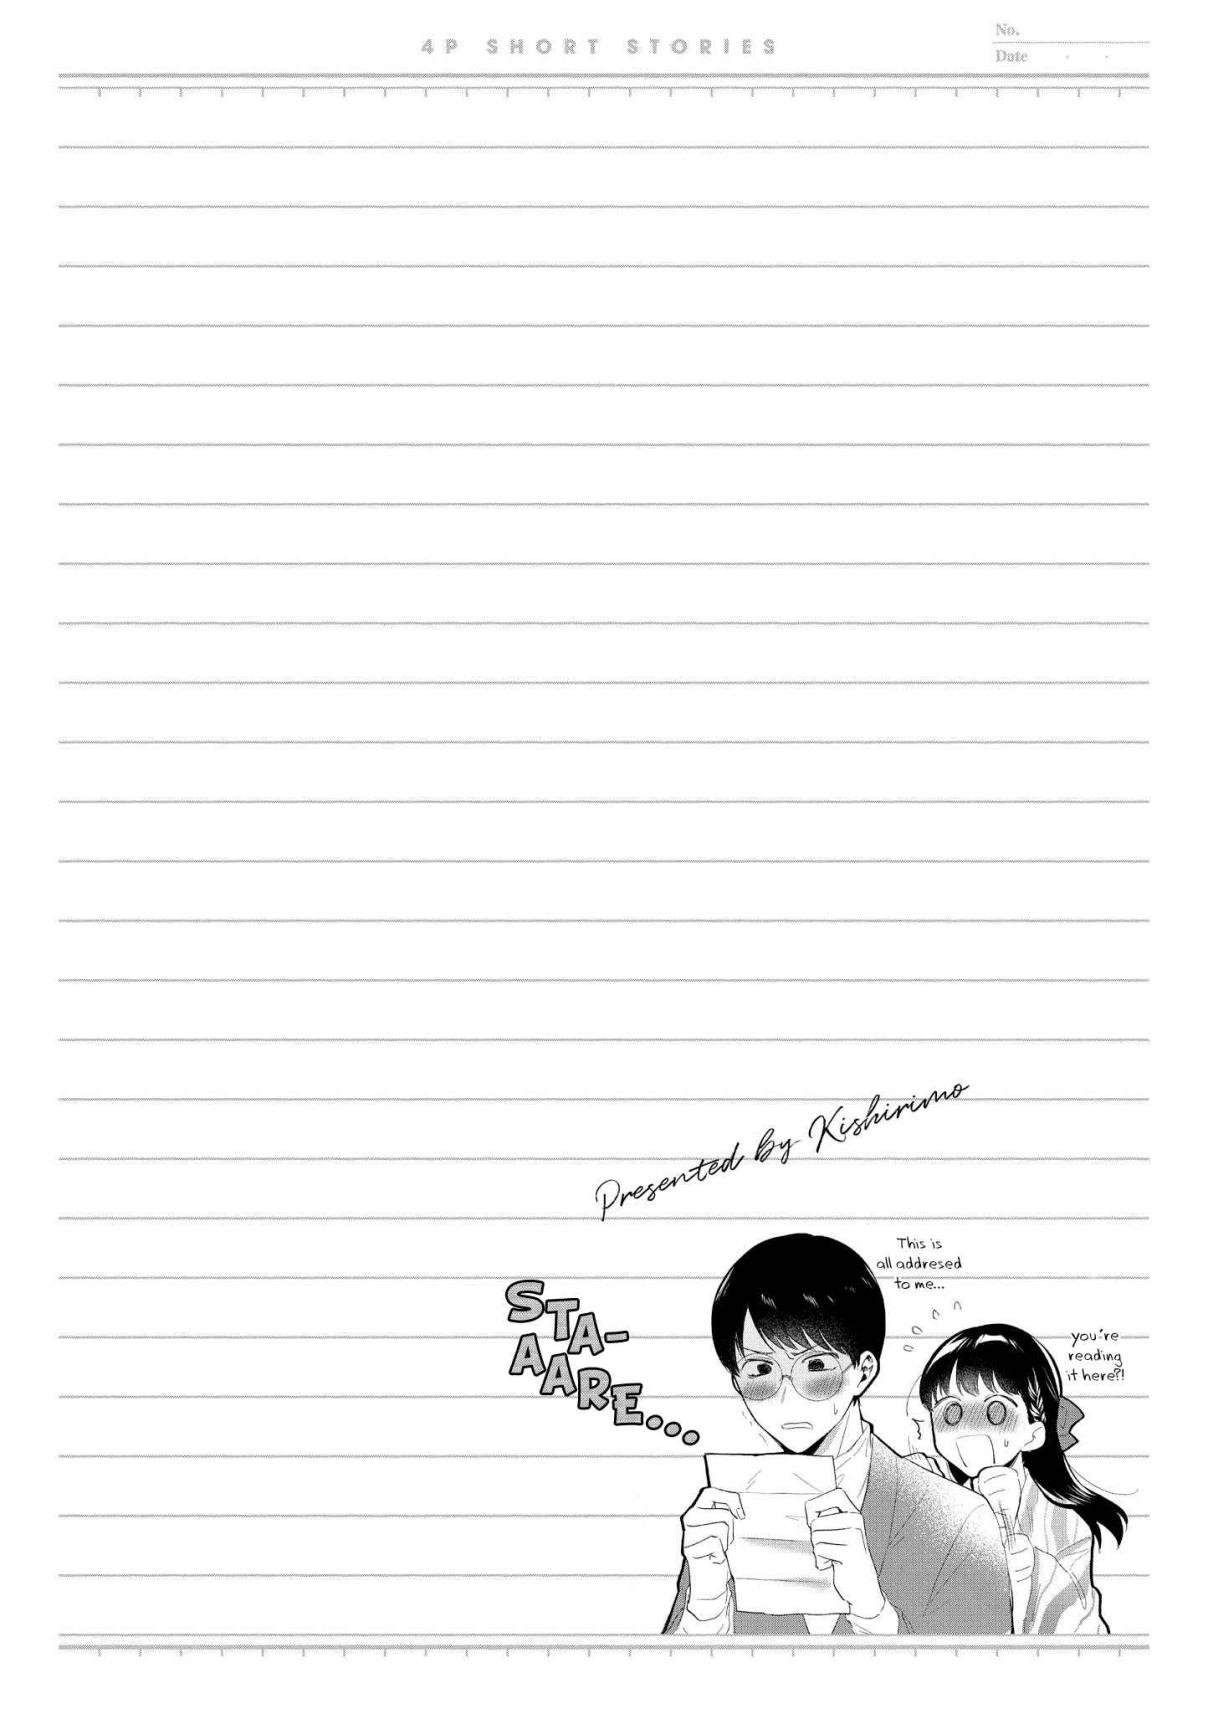 “It’s Too Precious and Hard to Read!!” 4P Short Stories Vol. 1 Ch. 10 Love Letter [by Kishirimo]